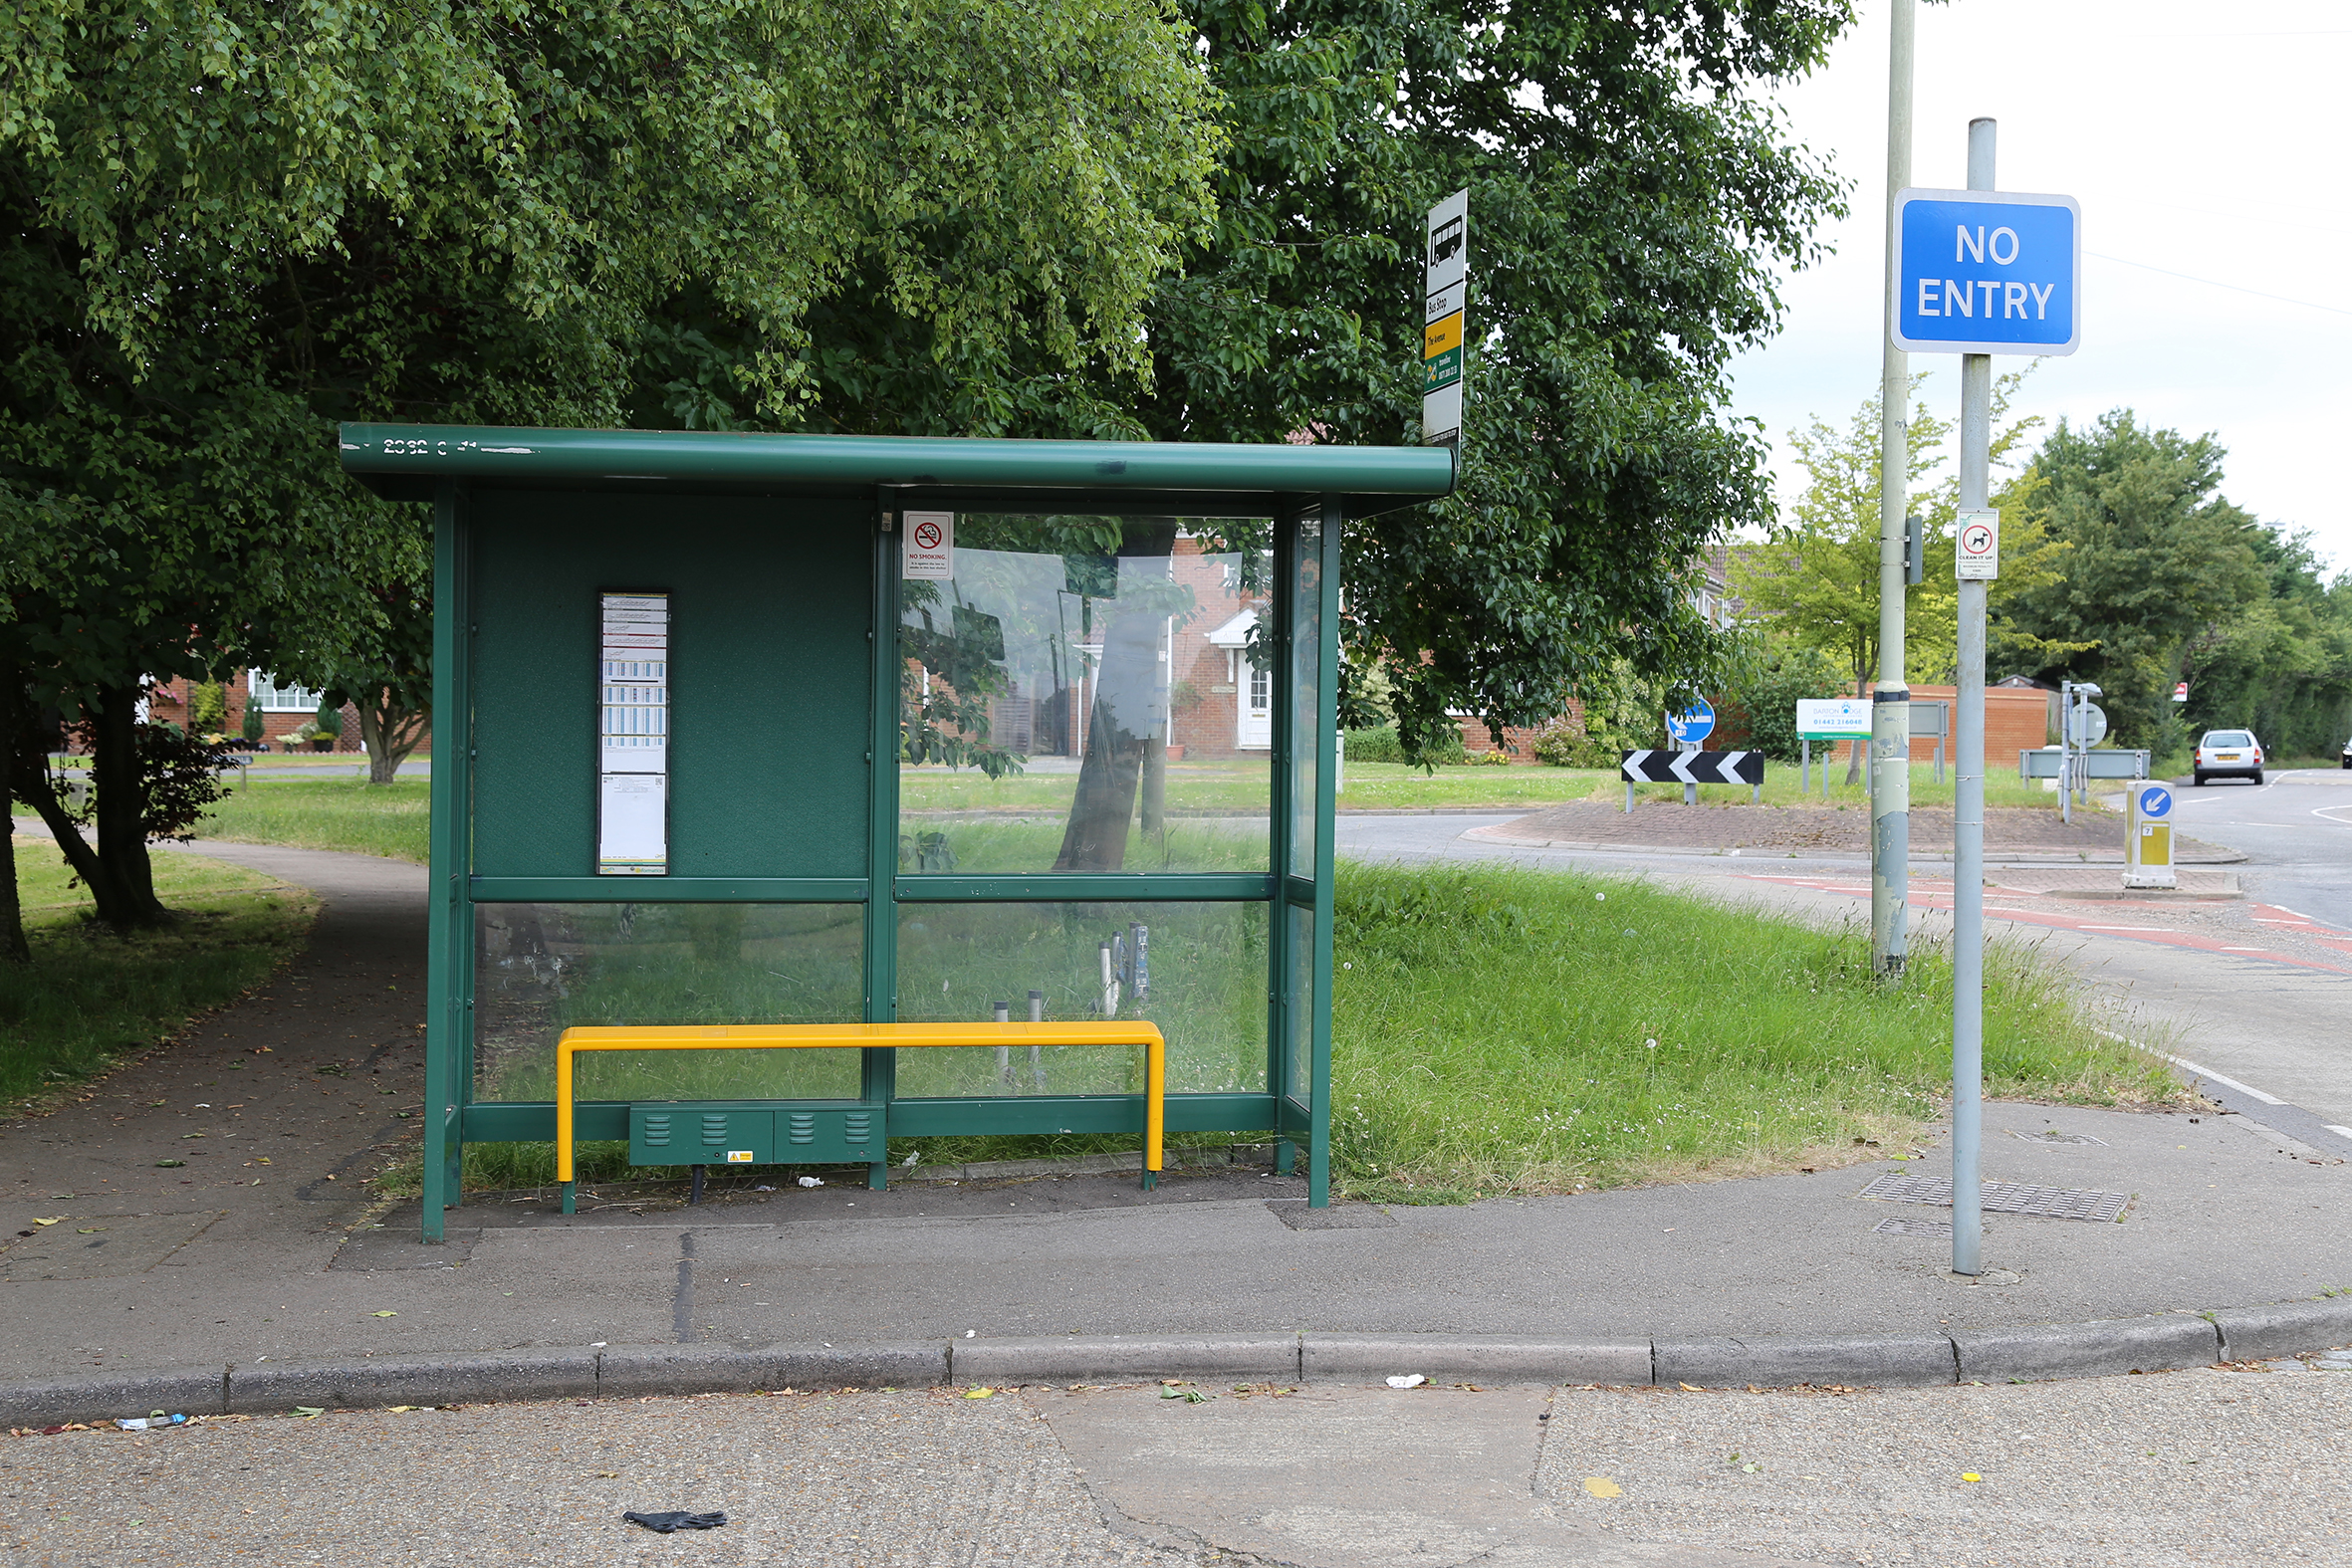 A green bus stop on the corner of a road